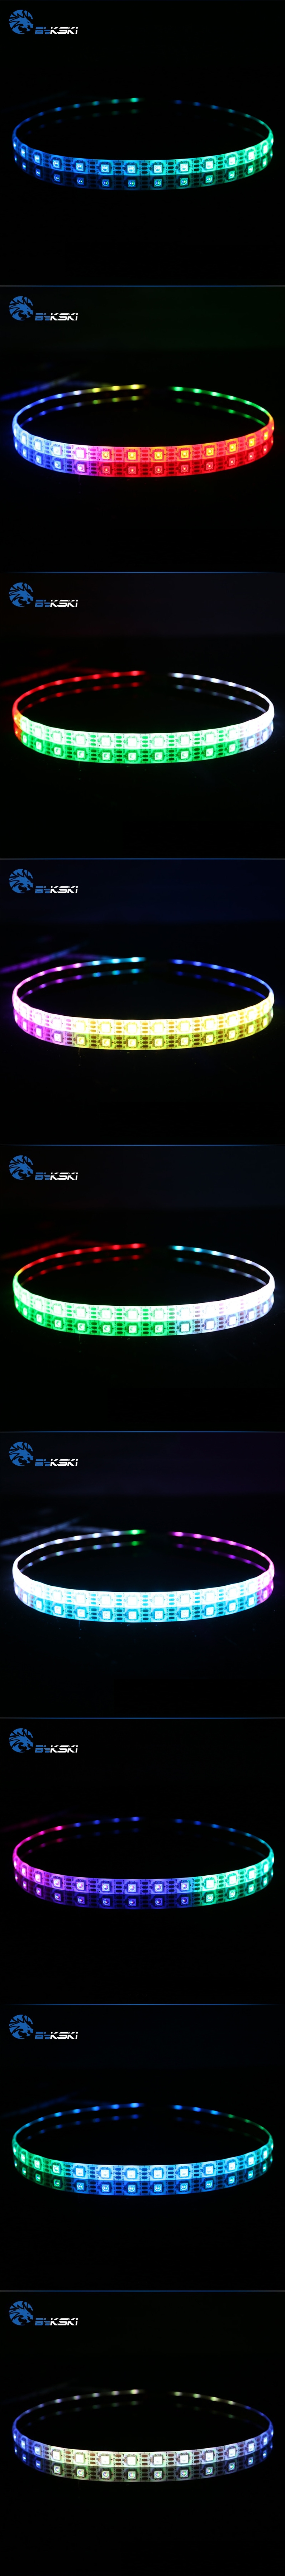 A large marketing image providing additional information about the product Bykski RBW Lighting Strip - 50cm - Additional alt info not provided